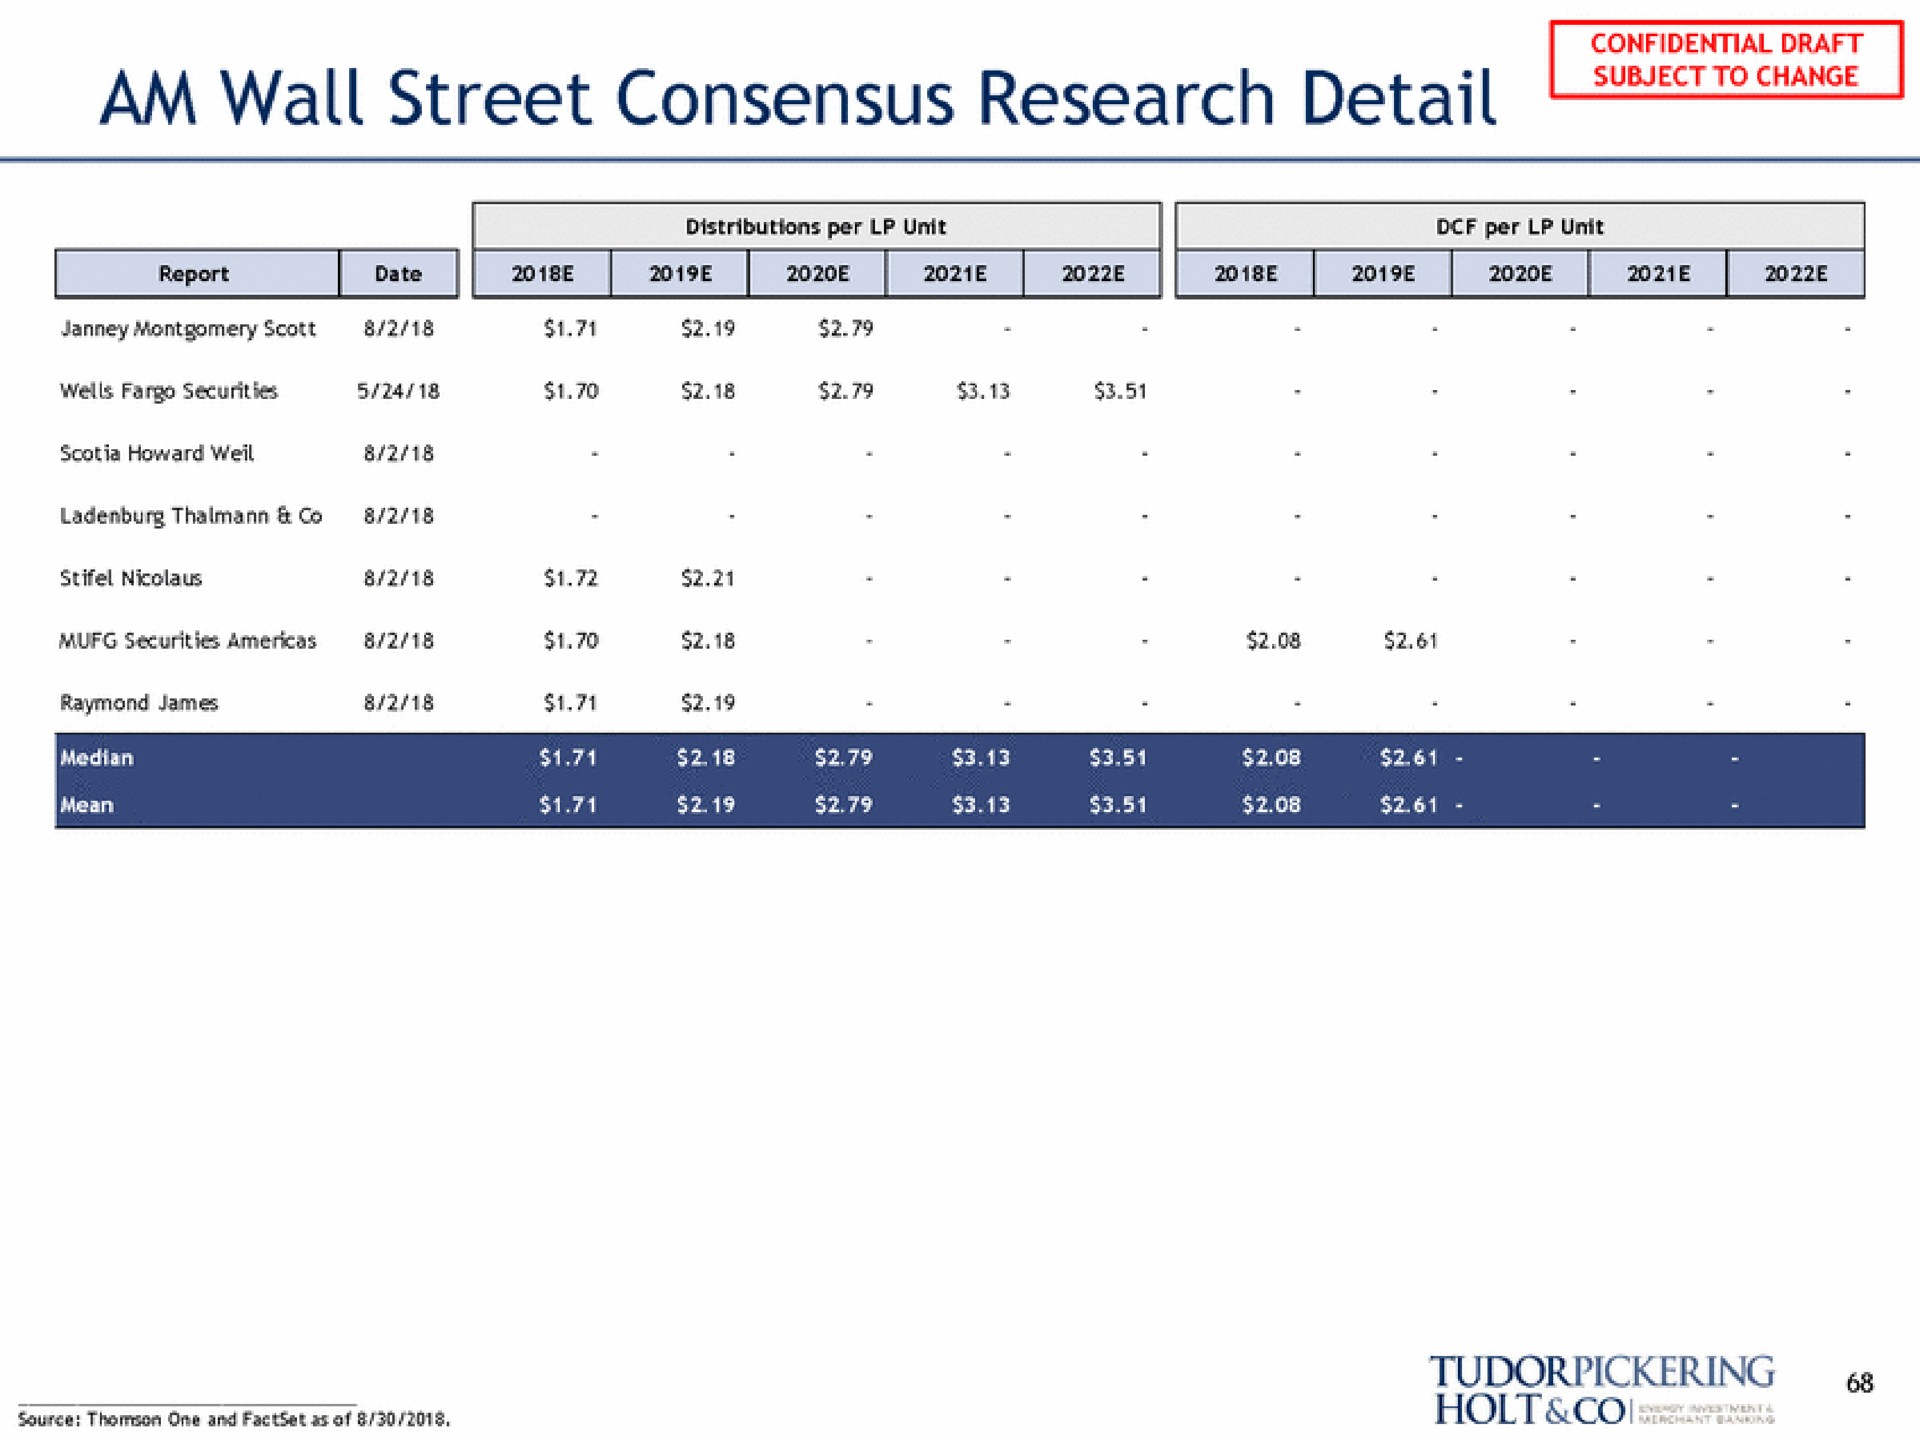 am wall street consensus research detail a | Tudor, Pickering, Holt & Co